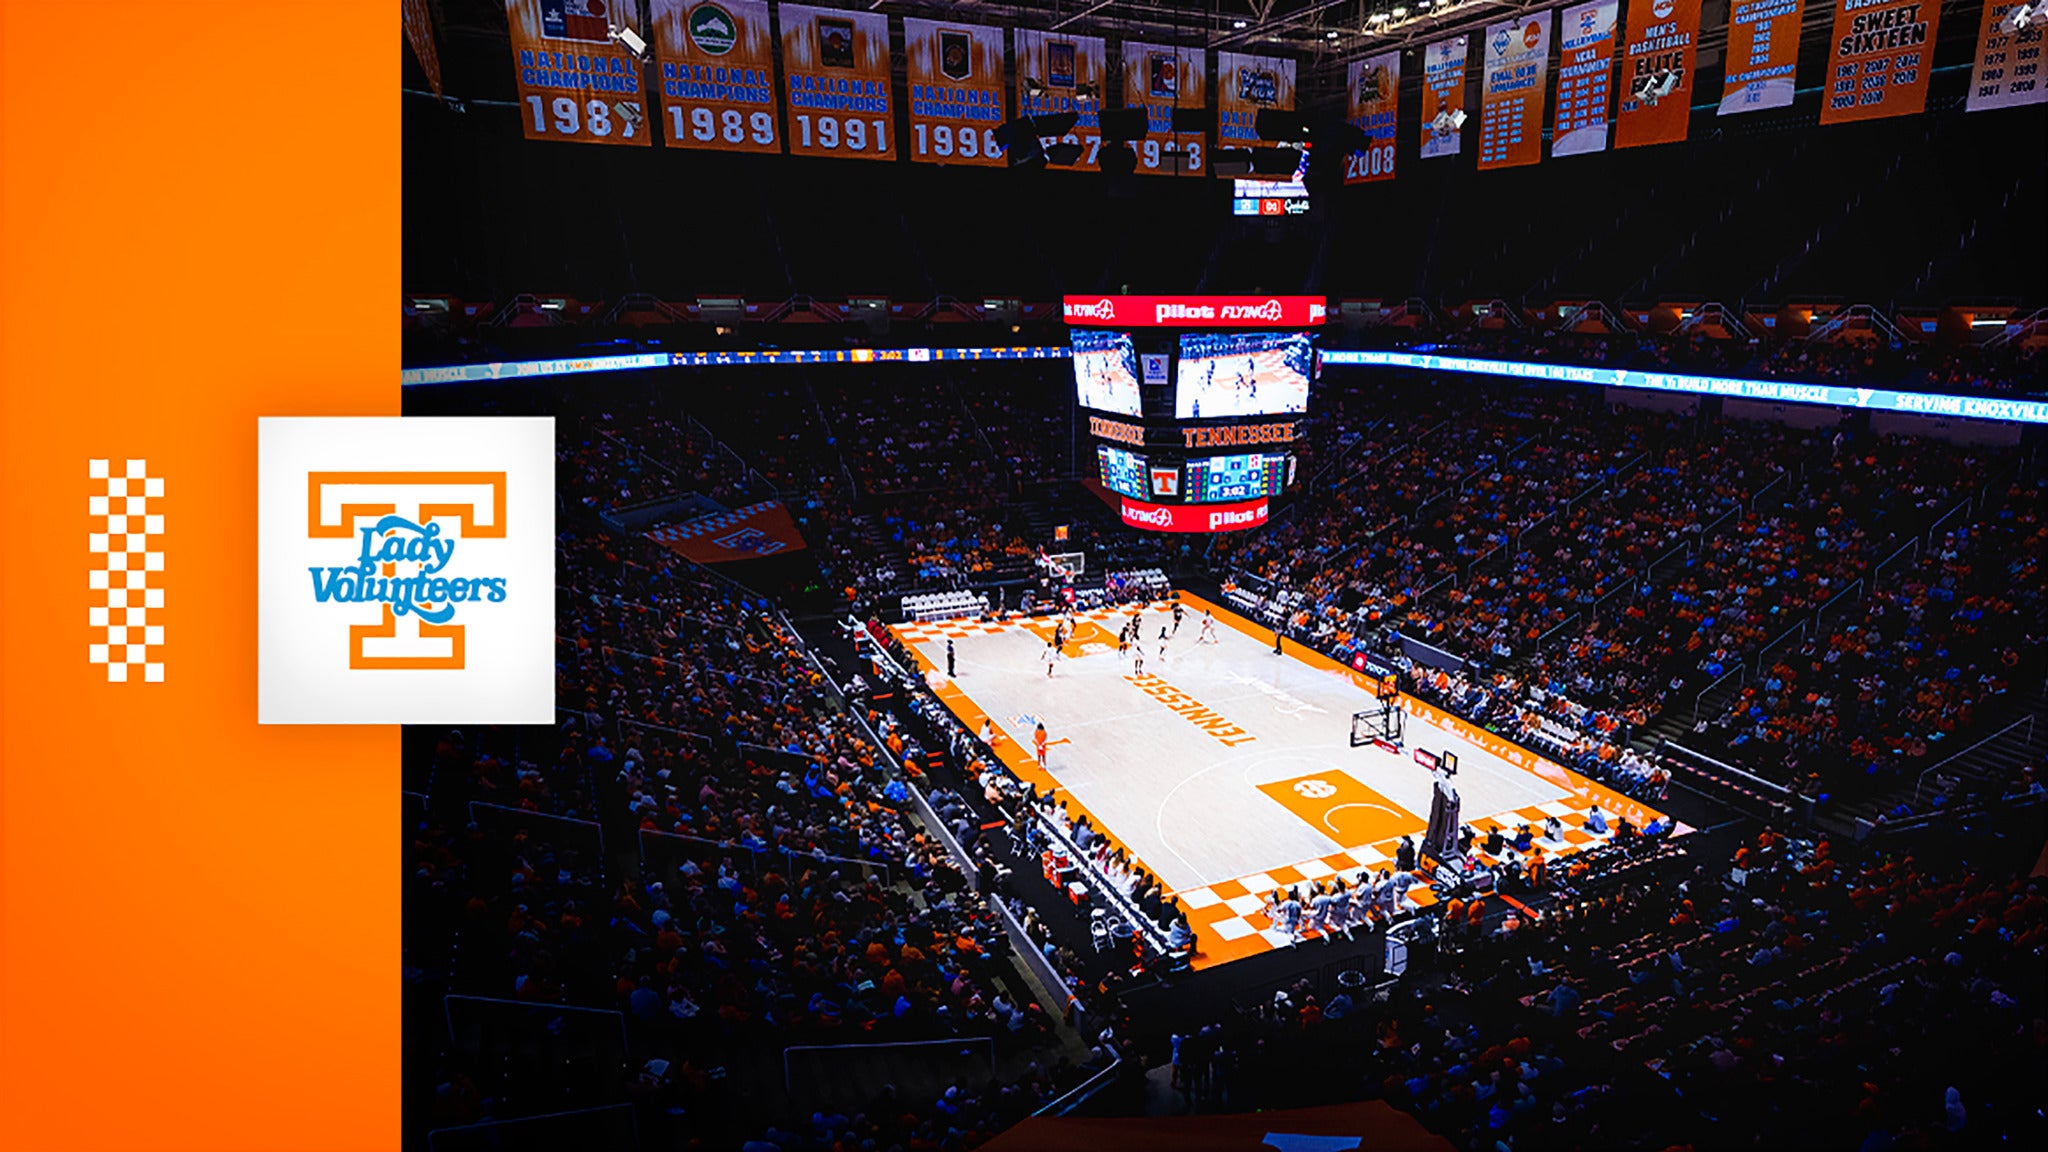 Tennessee Lady Volunteers Women's Basketball vs. Wofford Lady Terriers Basketball in Knoxville promo photo for Tennessee Fund Donor presale offer code